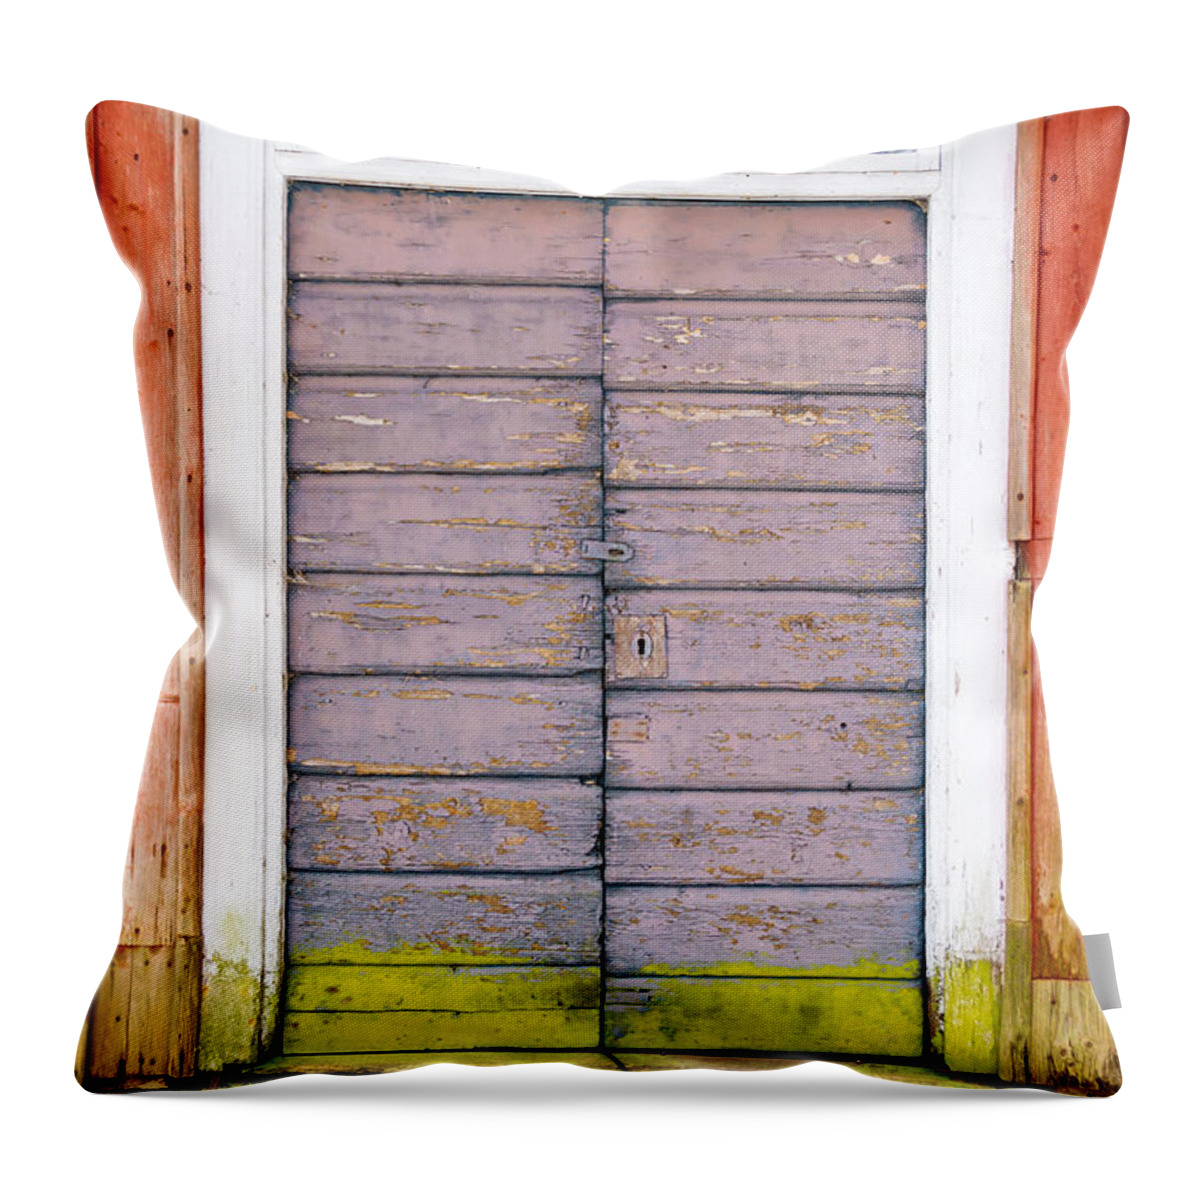 Hinge Throw Pillow featuring the photograph Doorway by Reimphoto